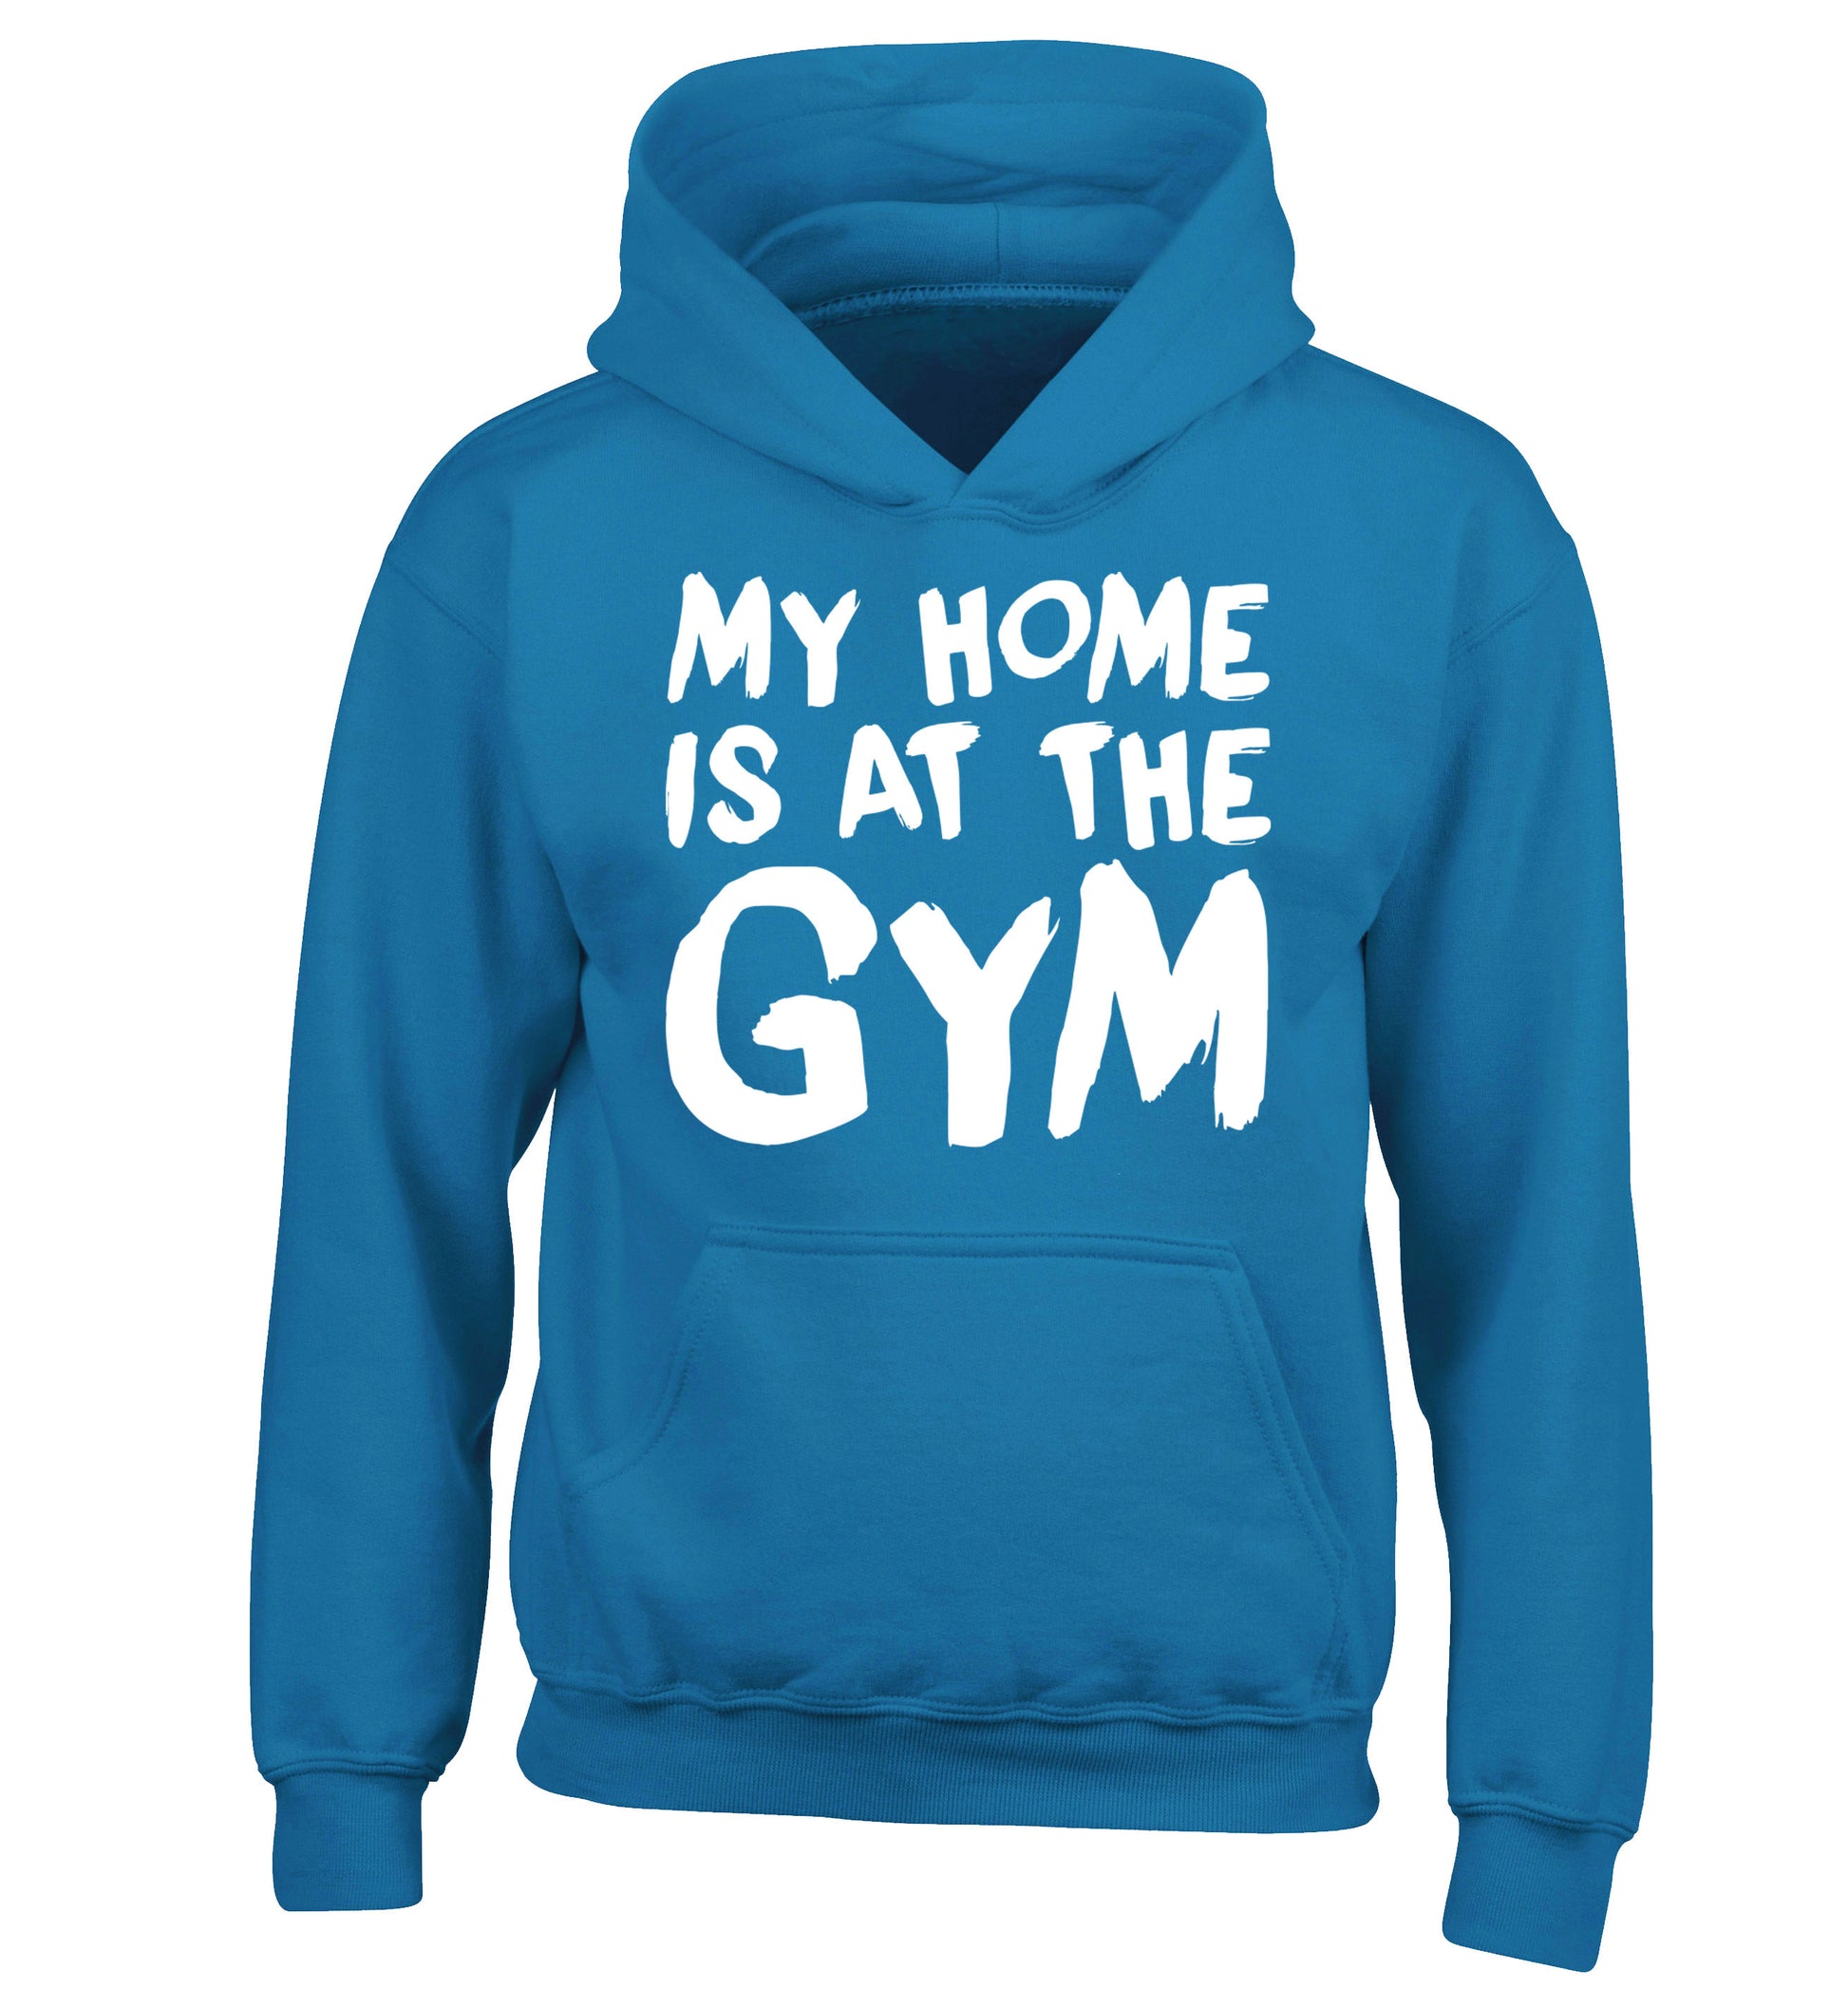 My home is at the gym children's blue hoodie 12-14 Years